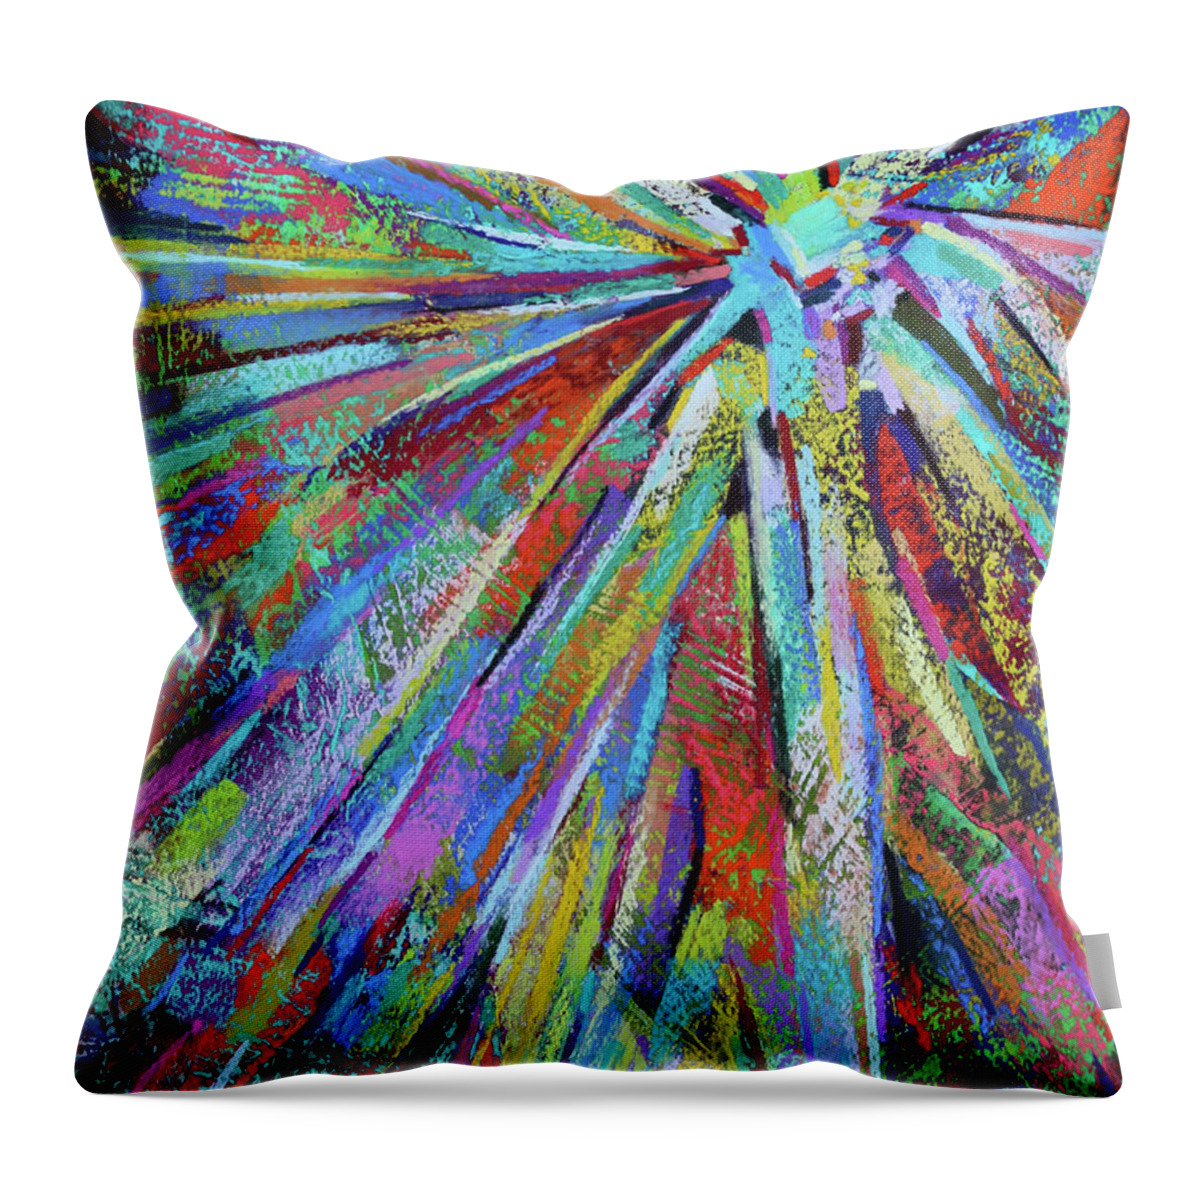 Epiphany Throw Pillow featuring the painting Epiphany by Polly Castor